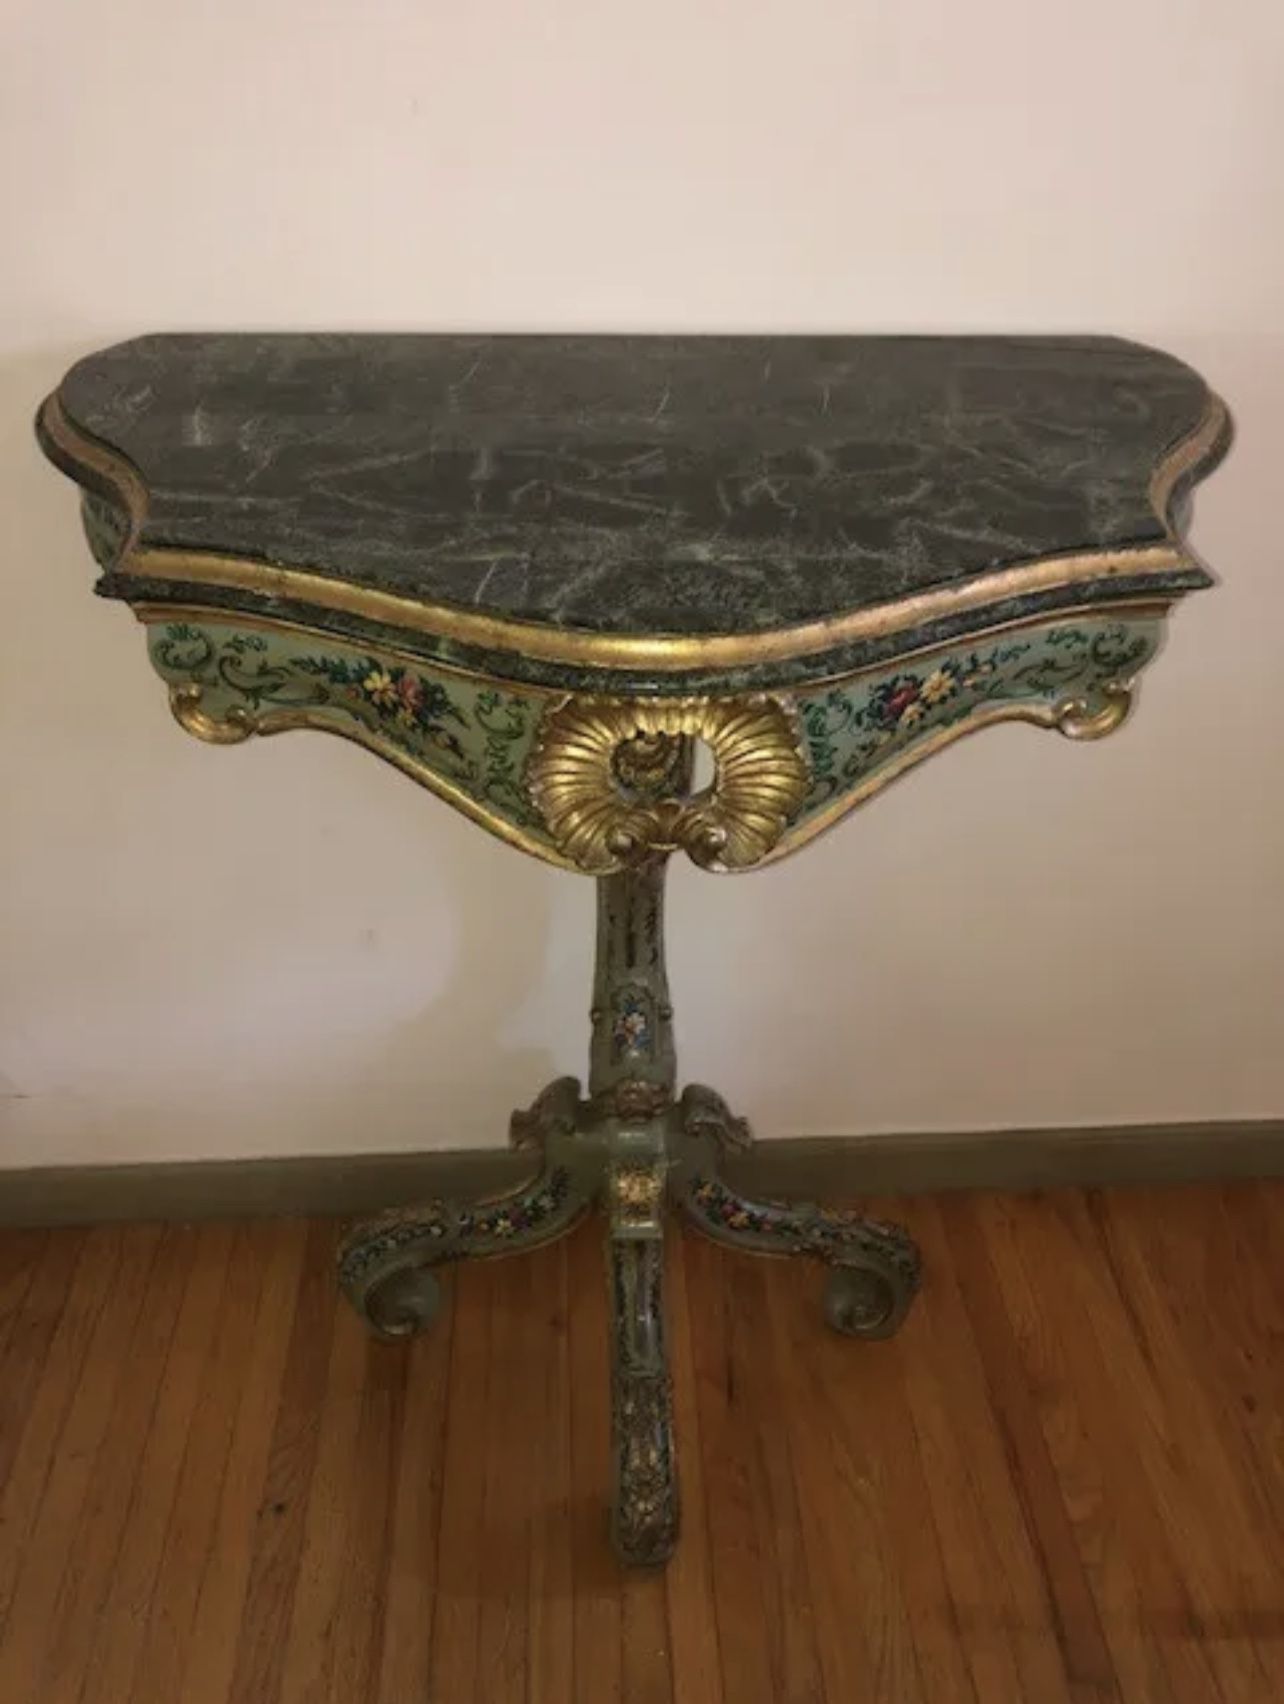 Gorgeous French Antique Three Feet Wall Table